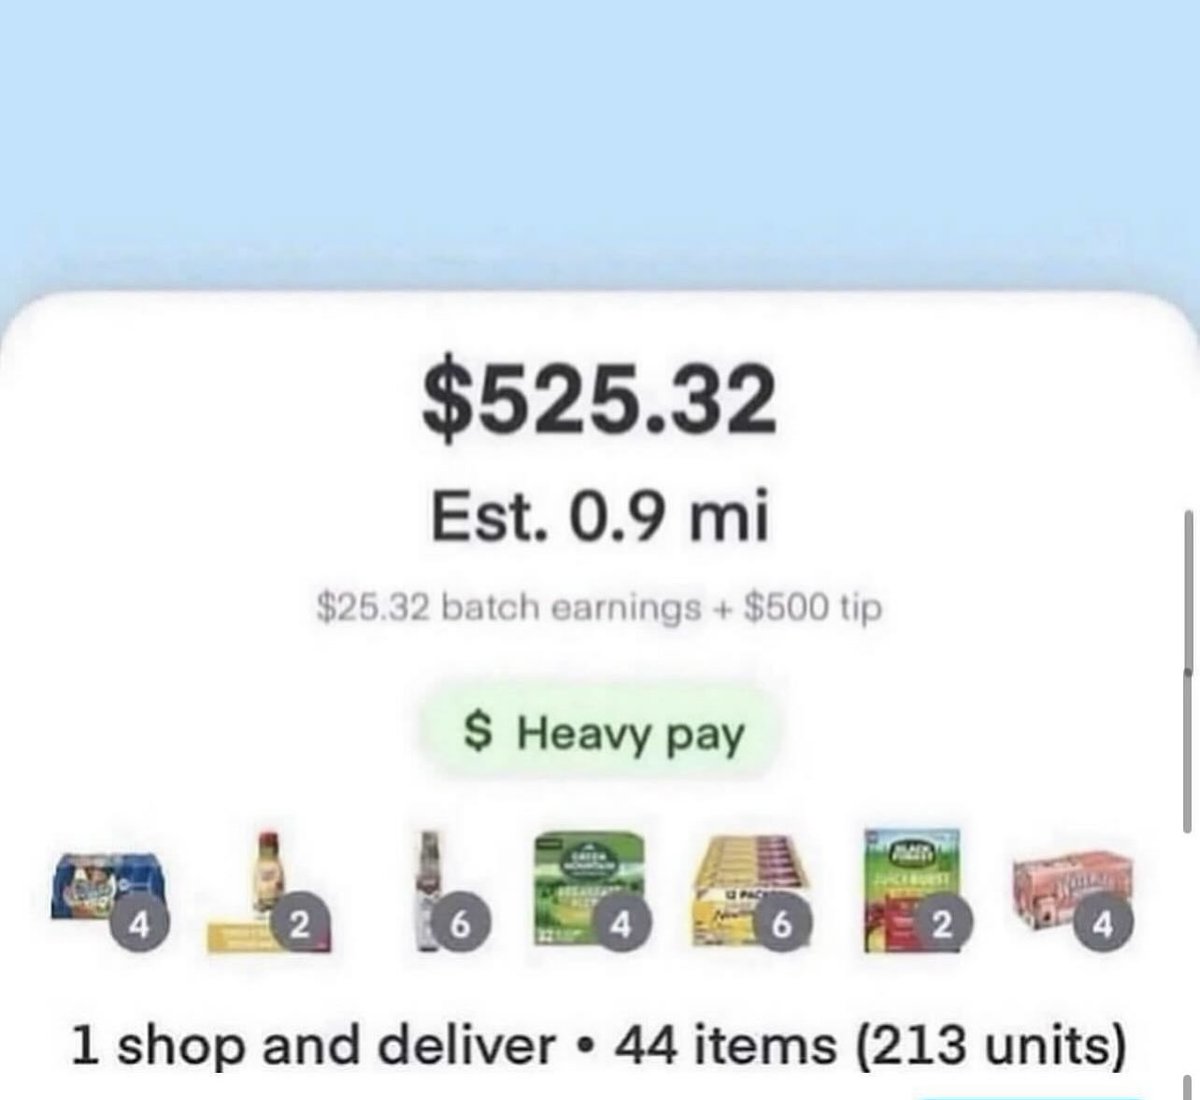 Bot for Instacart!!
-Use without Jailbreak in an iPhone!!
5a20 it grabbing ittche sheot wi ocastom Lotatonrantee of
Works for for iOS and android. 

#usopen #usnavy #usasarees #usbusiness #ohioexplored #ohiomodel #ohiophotographer #floridakeys #florianopolis #canada #usa…